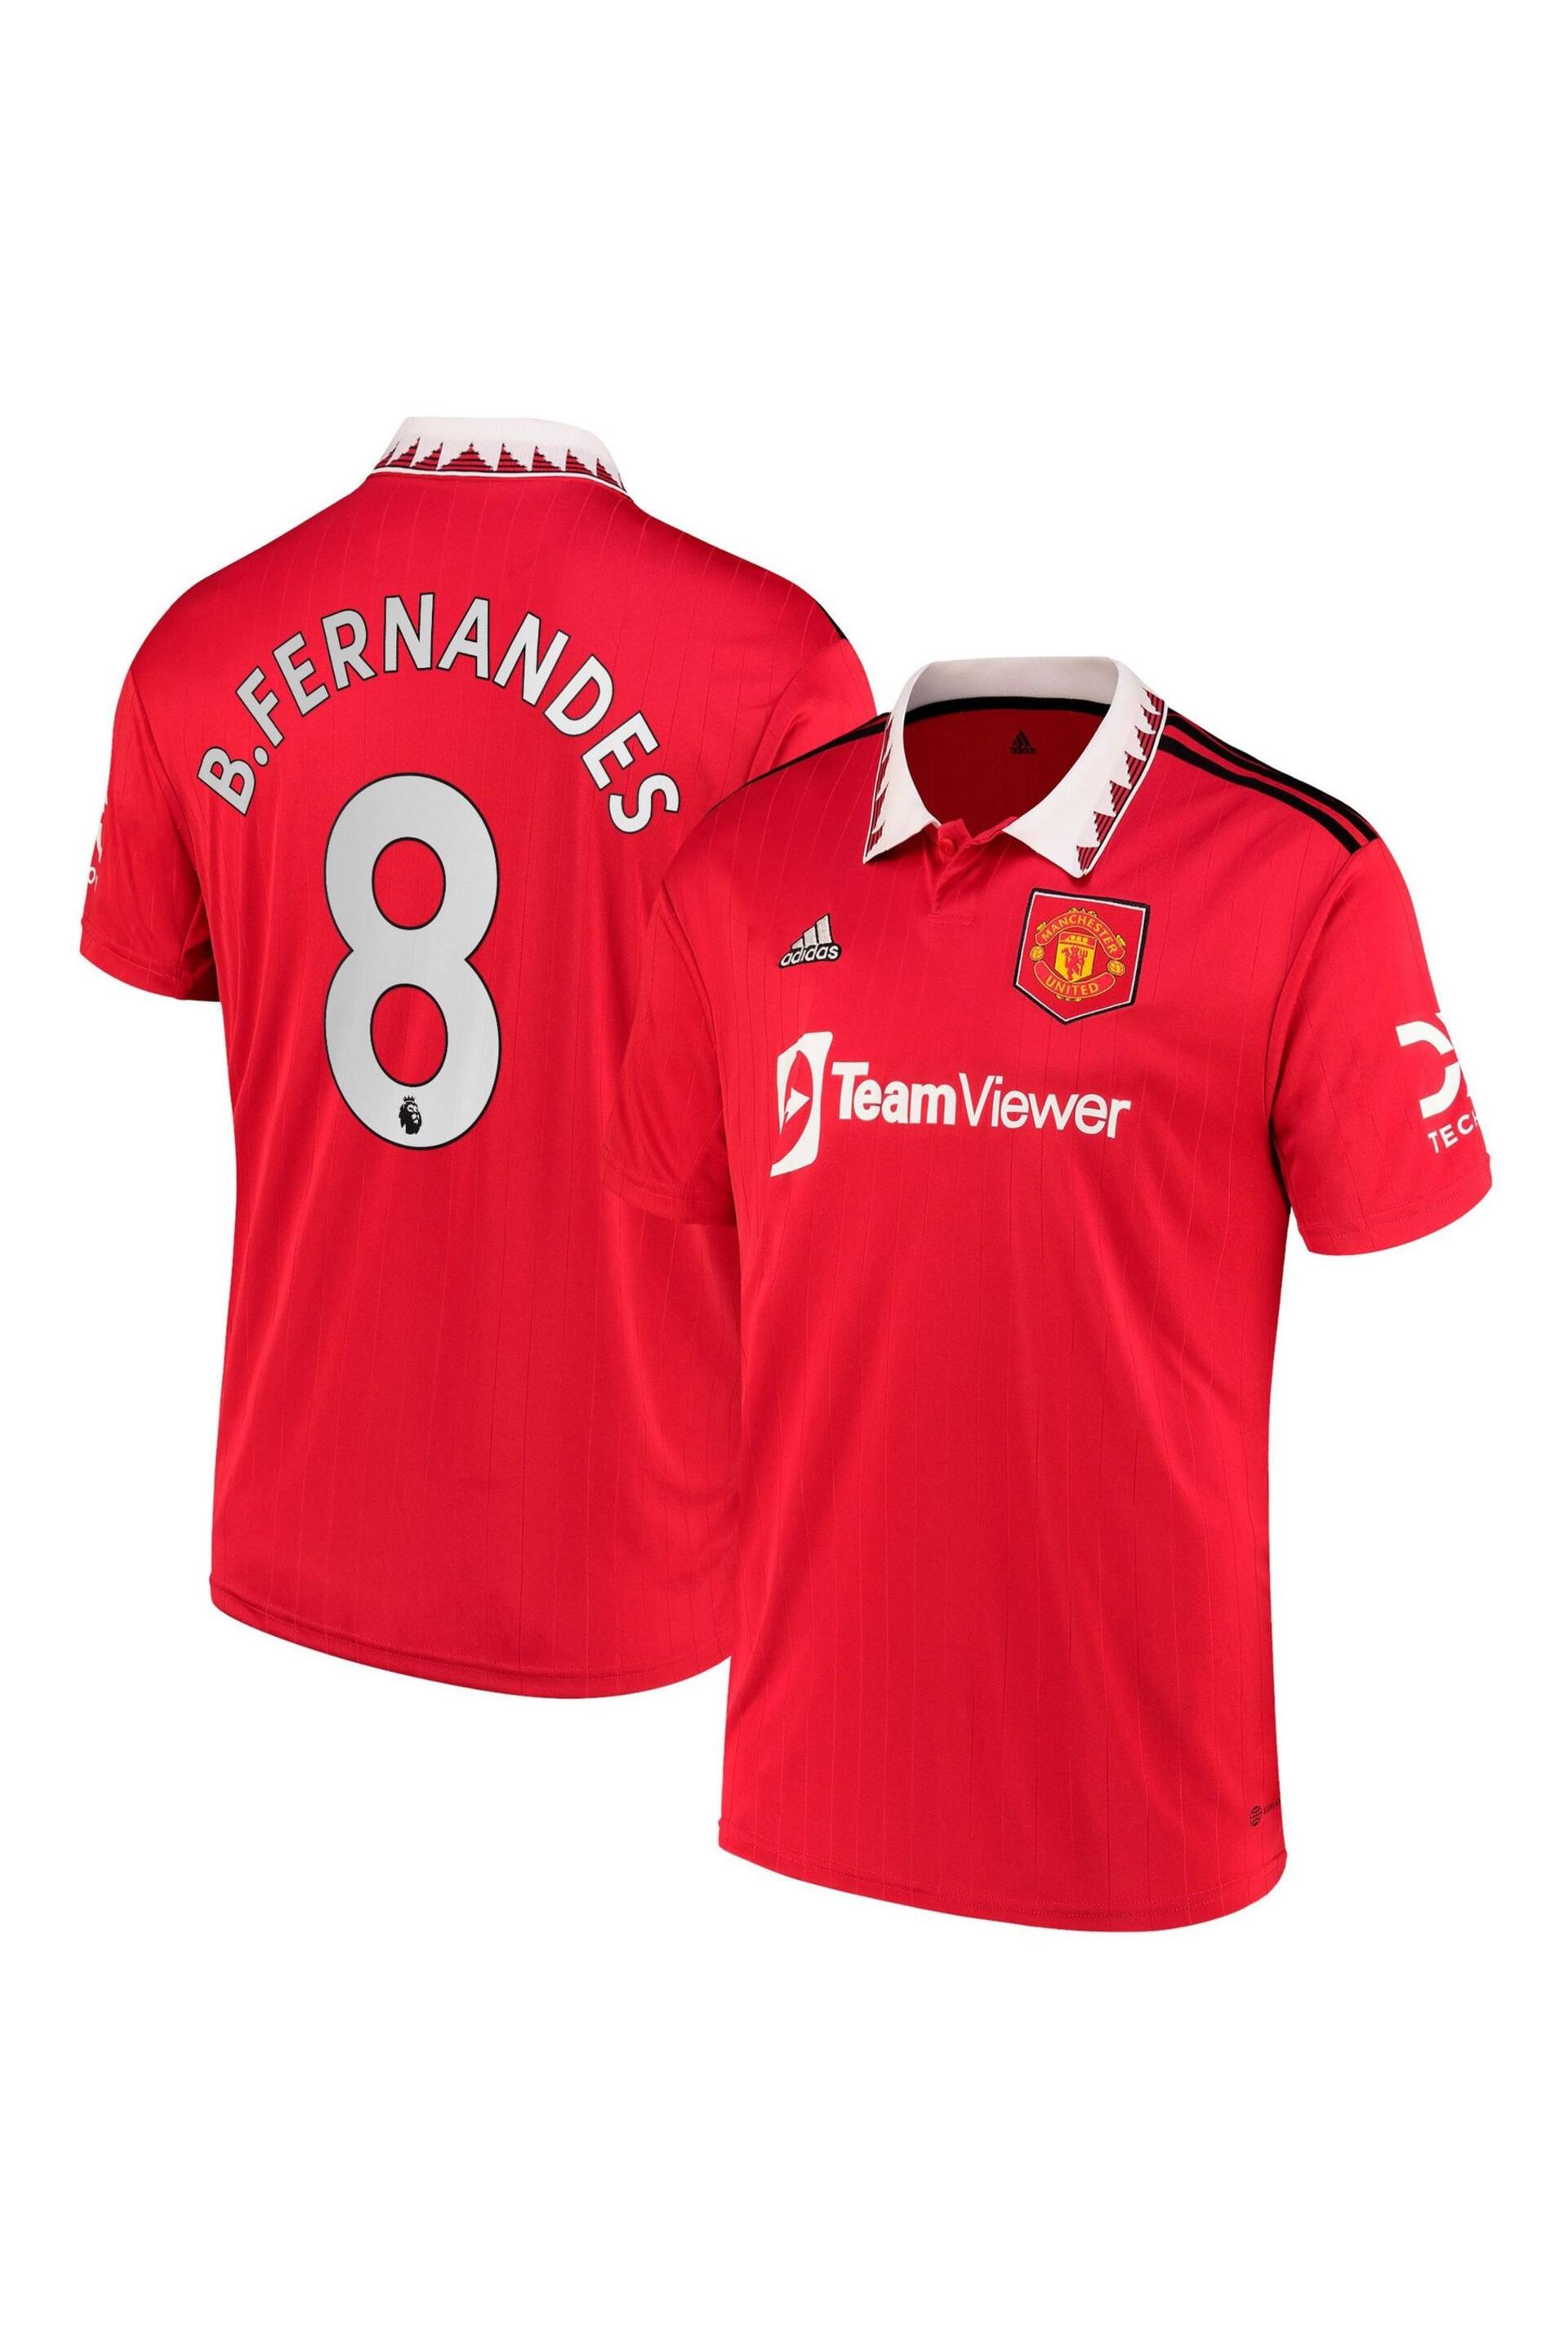 adidas Red B. Fernandes - 8 Manchester United 22/23 Home Adult Jersey - Image 1 of 3